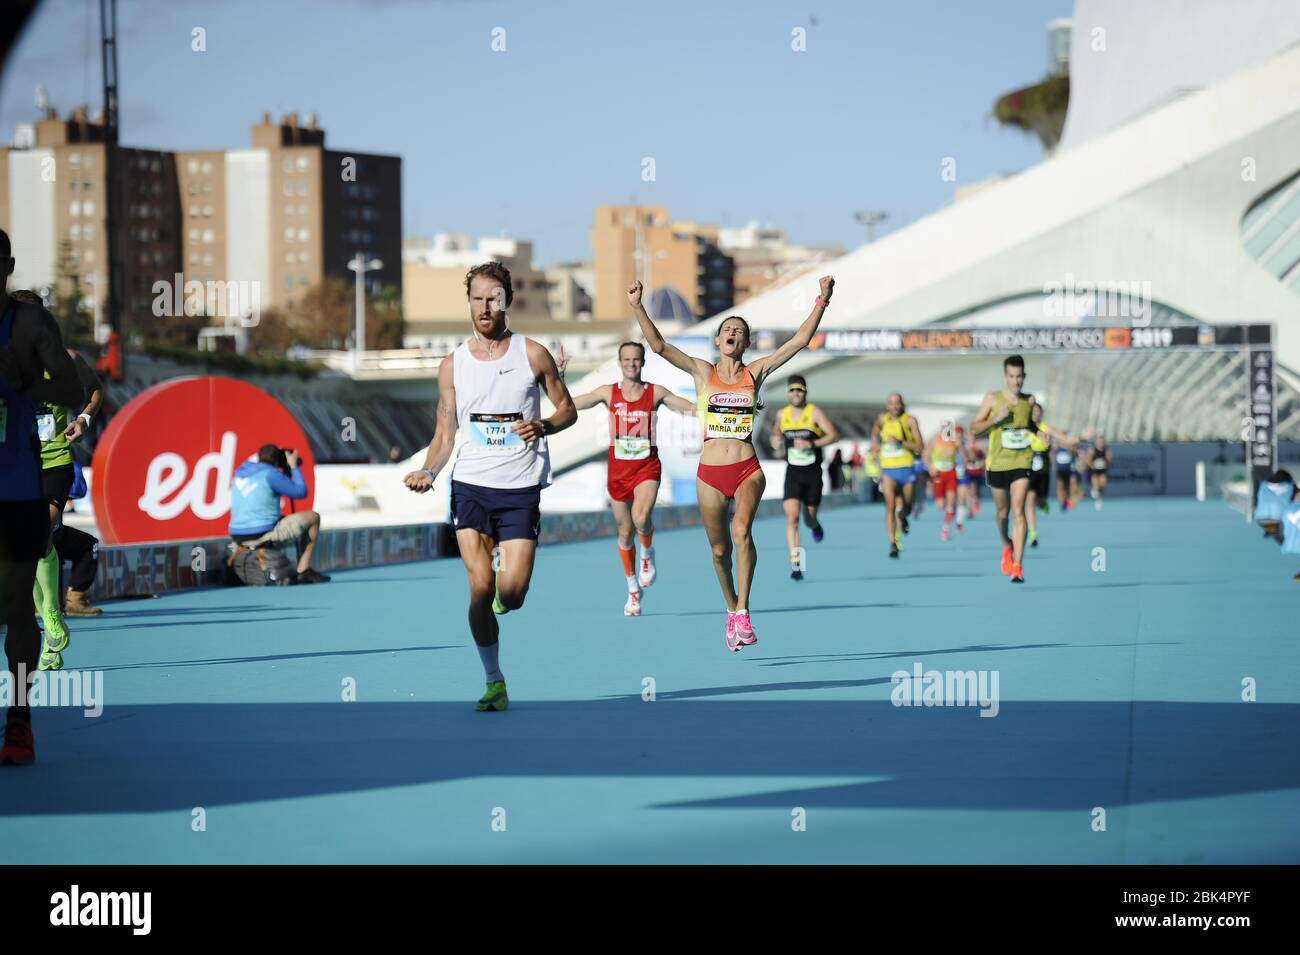 VALENCIA, SPAIN - 1 DECEMBER 2019: runners entering the finish line in the 2019  Valencia marathon Stock Photo - Alamy